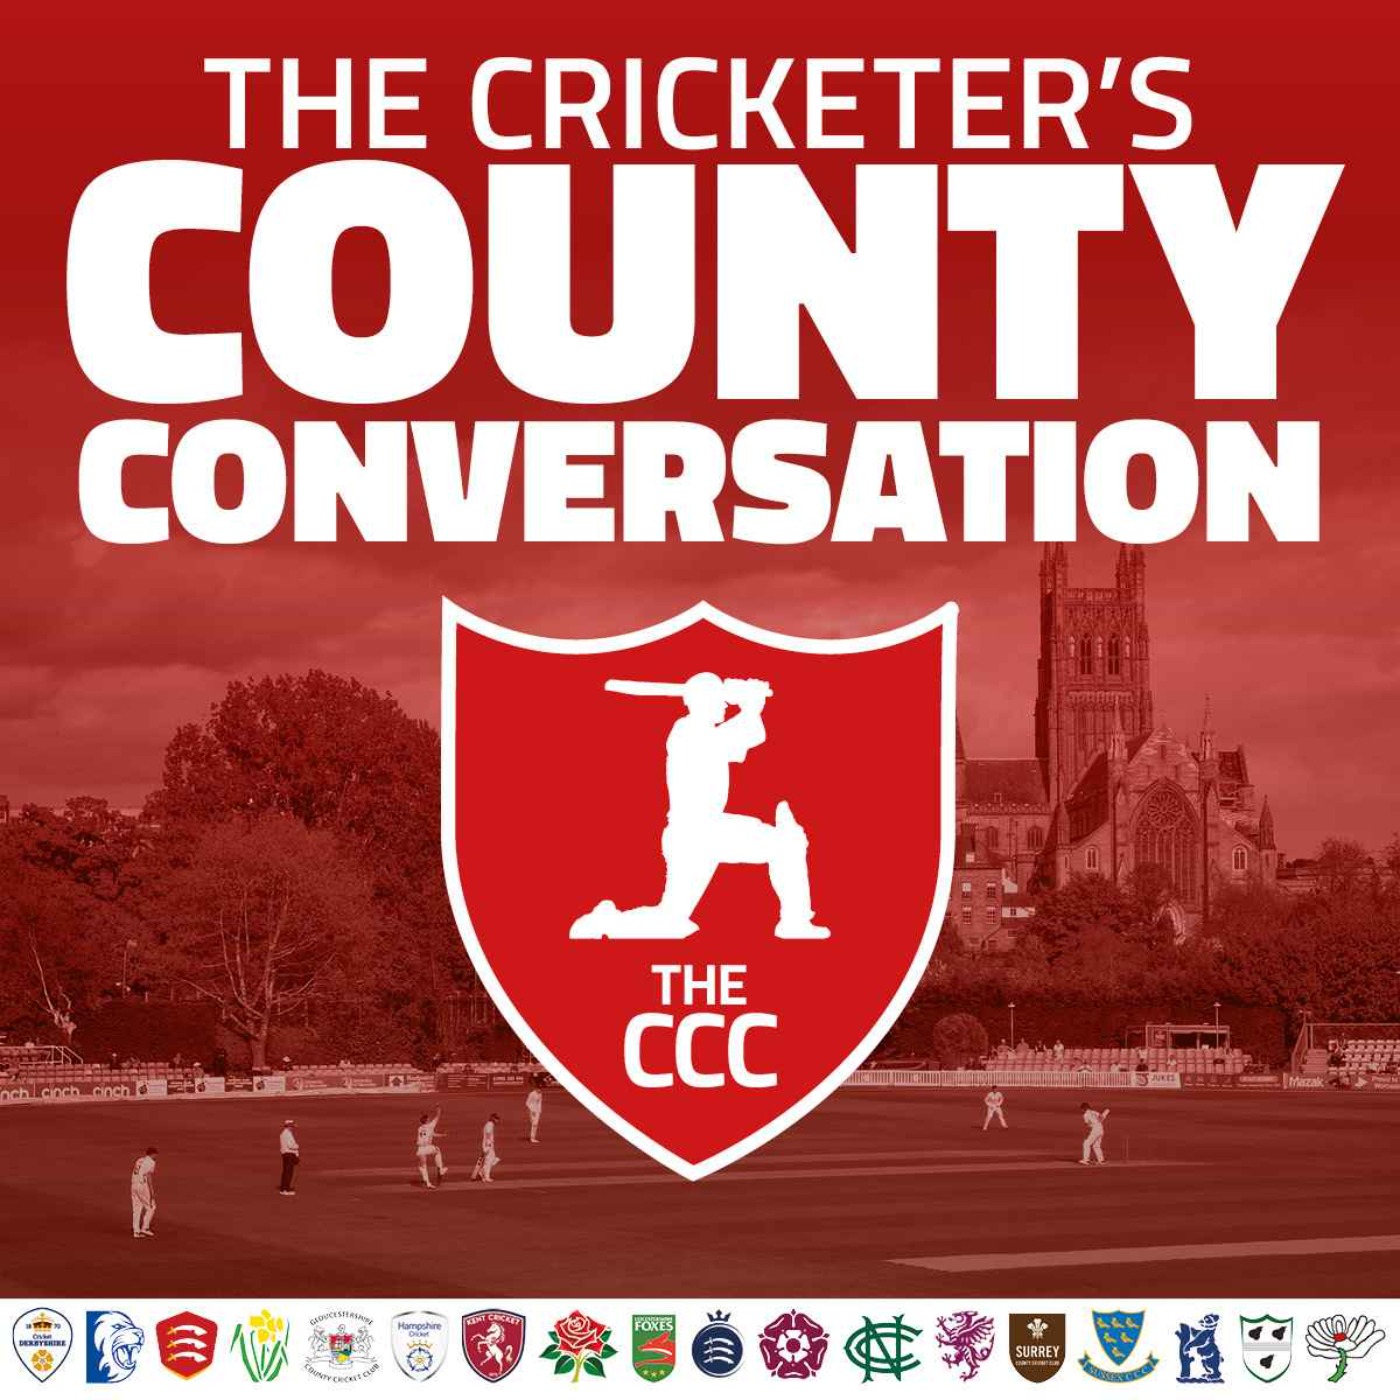 The Cricketer's County Conversation Image